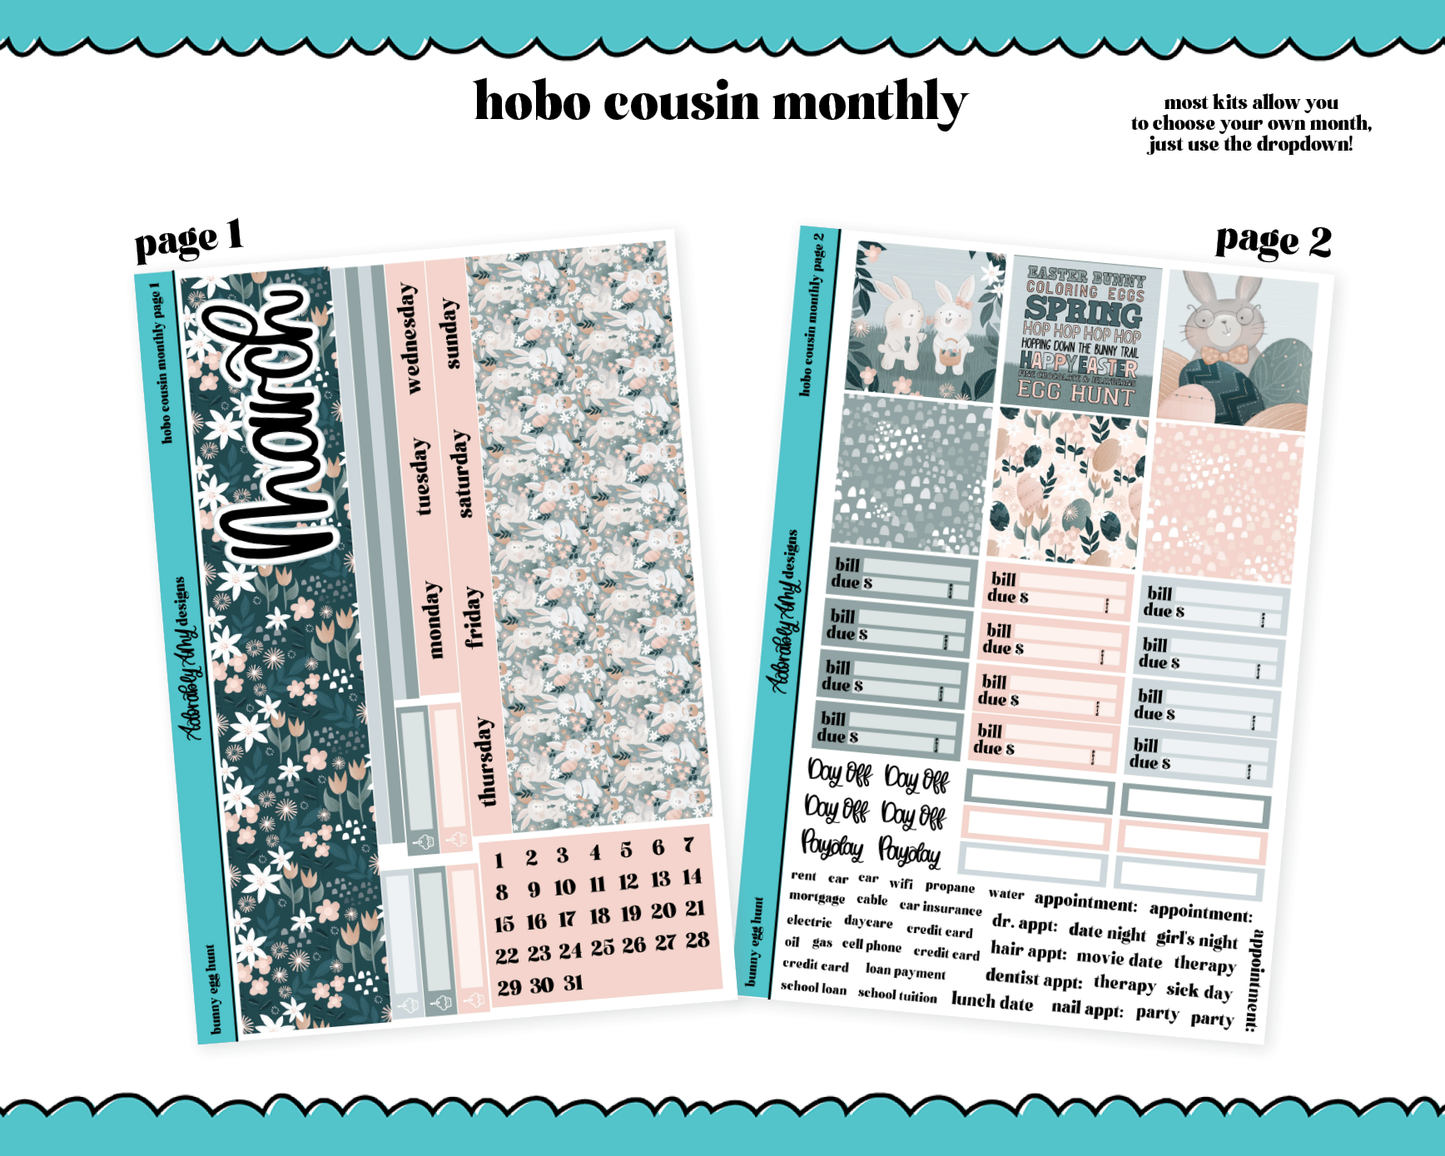 Hobonichi Cousin Monthly Pick Your Month Bunny Egg Hunt Watercolor Planner Sticker Kit for Hobo Cousin or Similar Planners